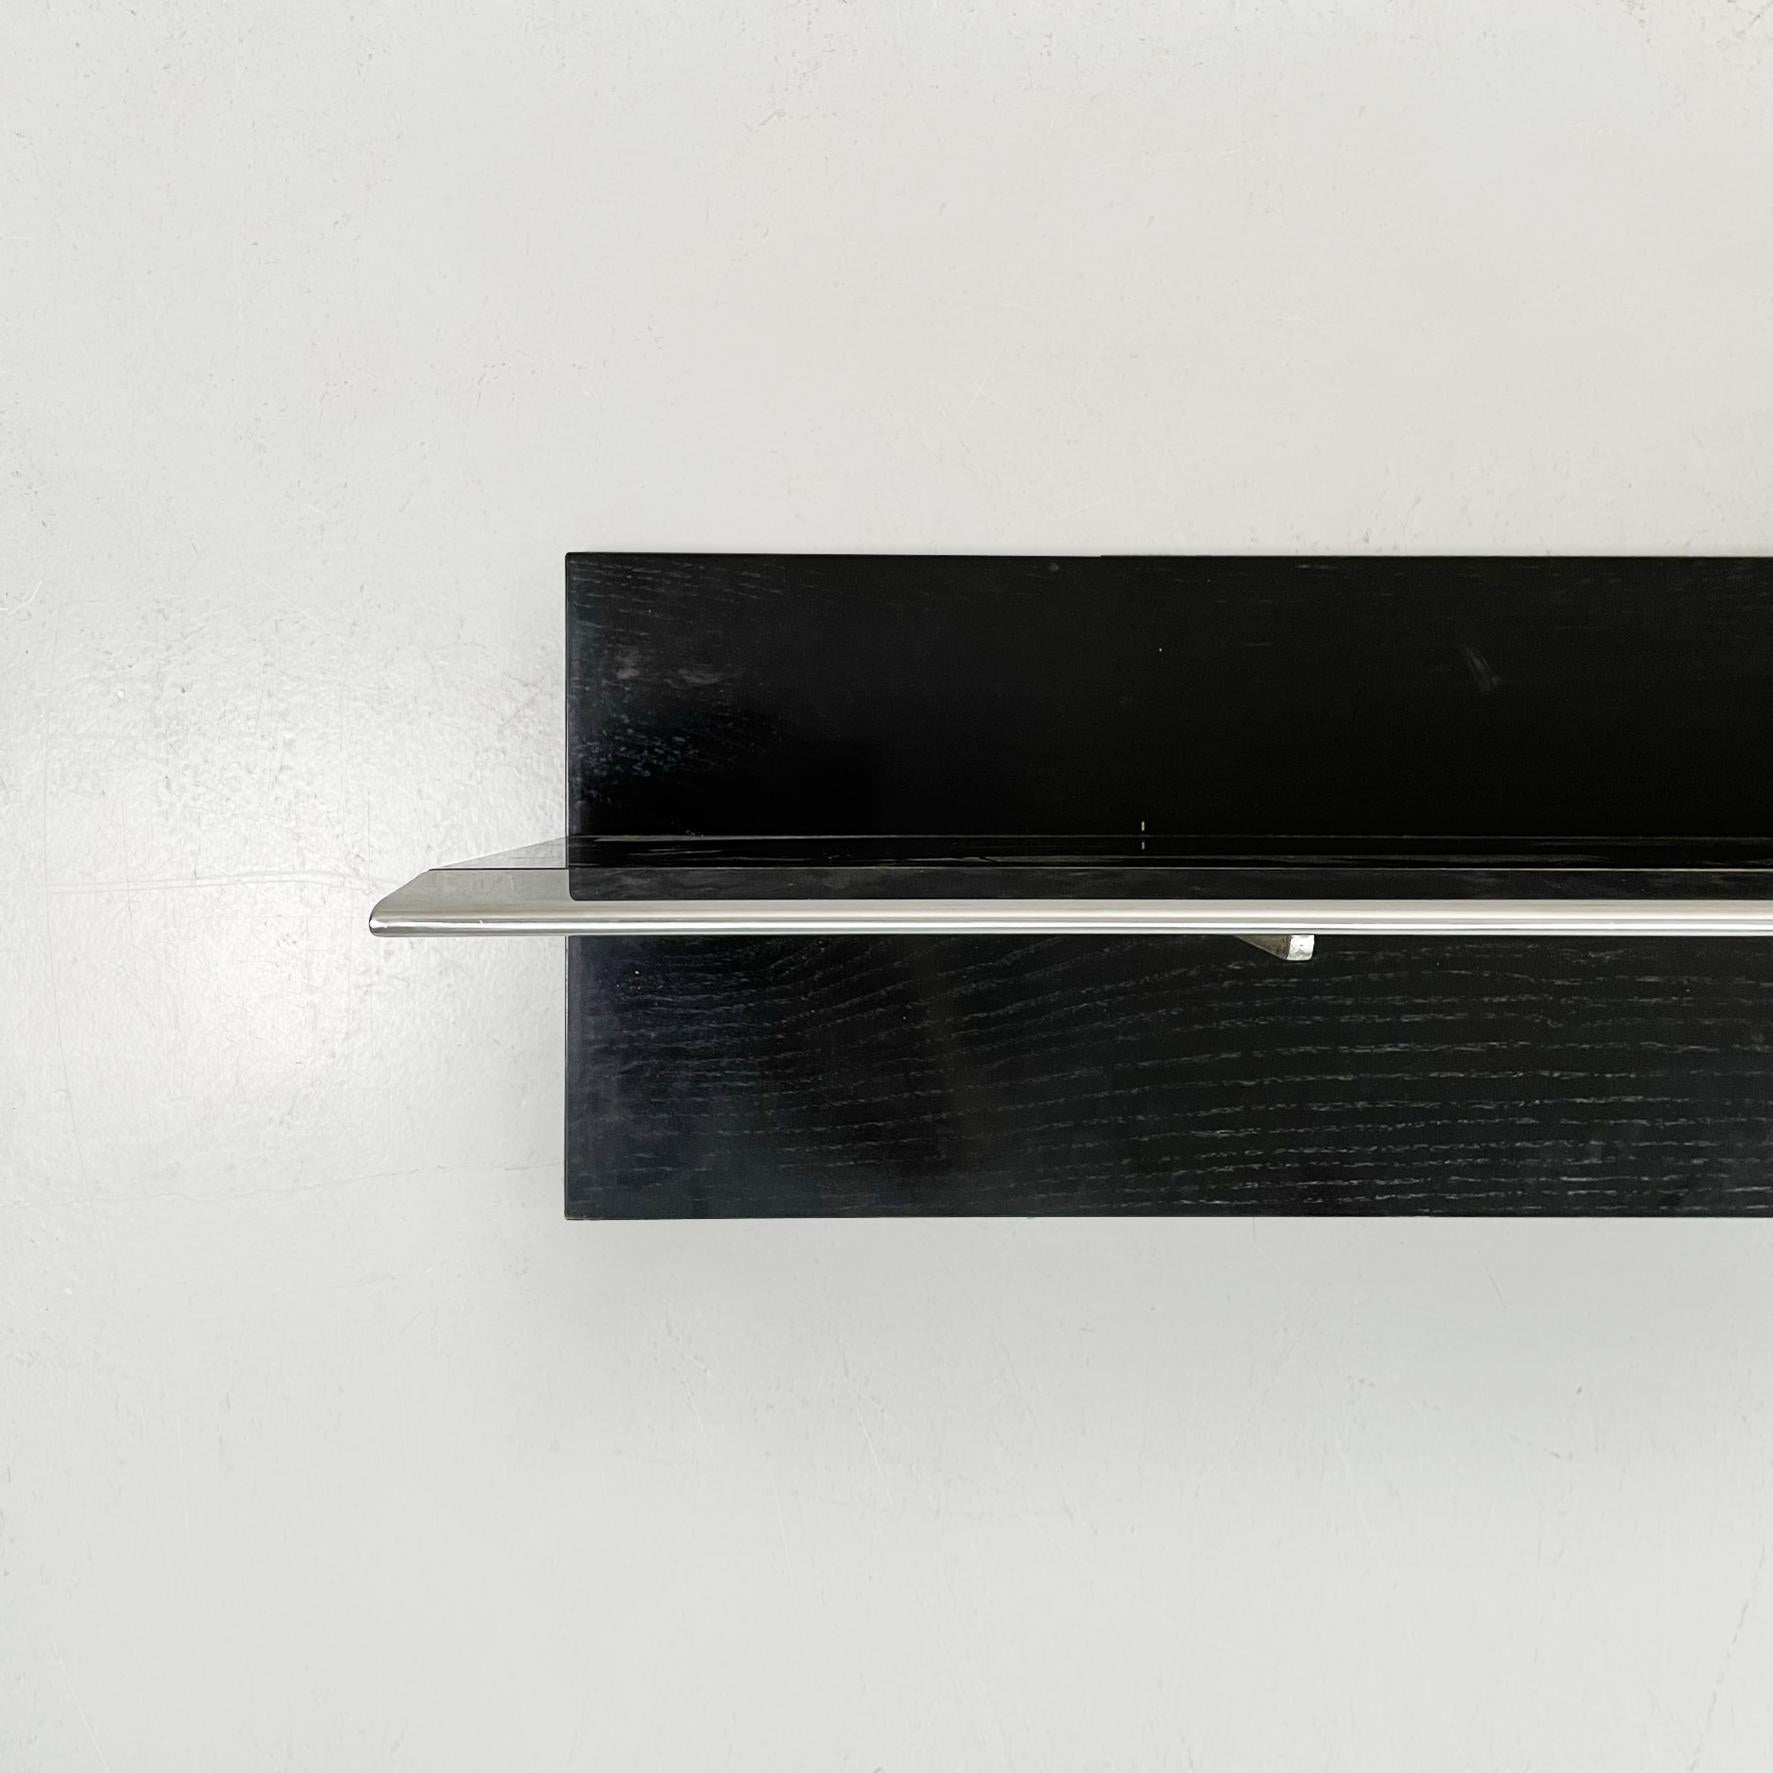 Italian modern Shelf in black wood and steel, 1980s
Shelf with rectangular top in black painted wood and steel finishes. The shelf has a vertical axis on which the 2 steel supports are placed.

1980s.

Good conditions, the supports show signs of